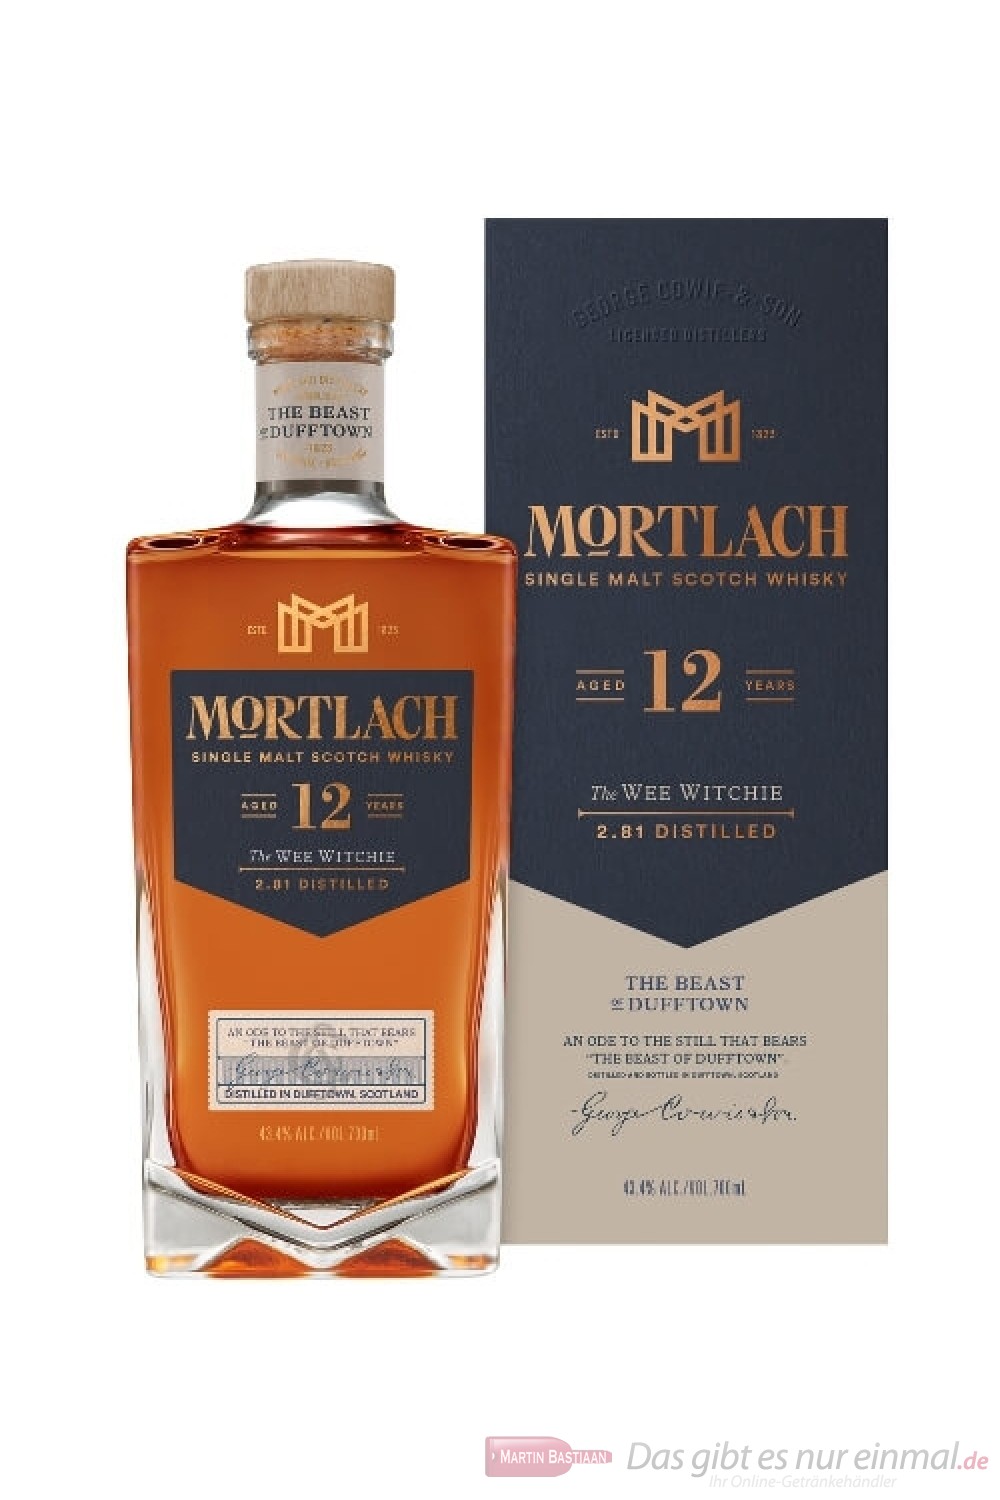 Mortlach 12 Years The WEE WITCHIE